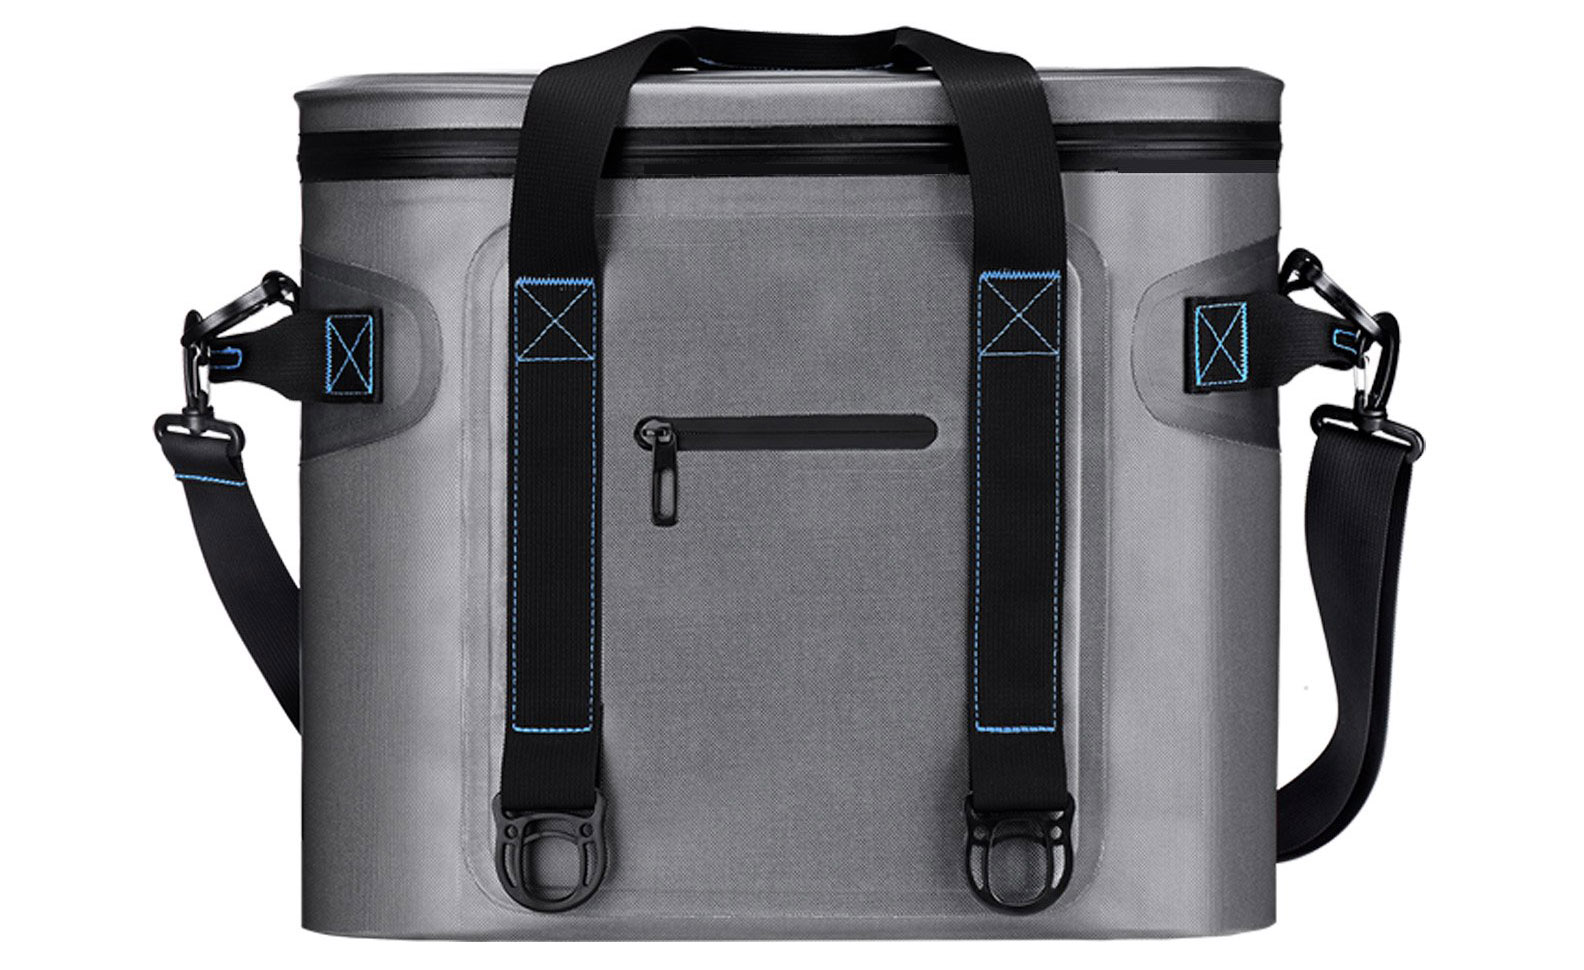 The 15 Best Soft Coolers On The Market, Ranked And Reviewed For 2021